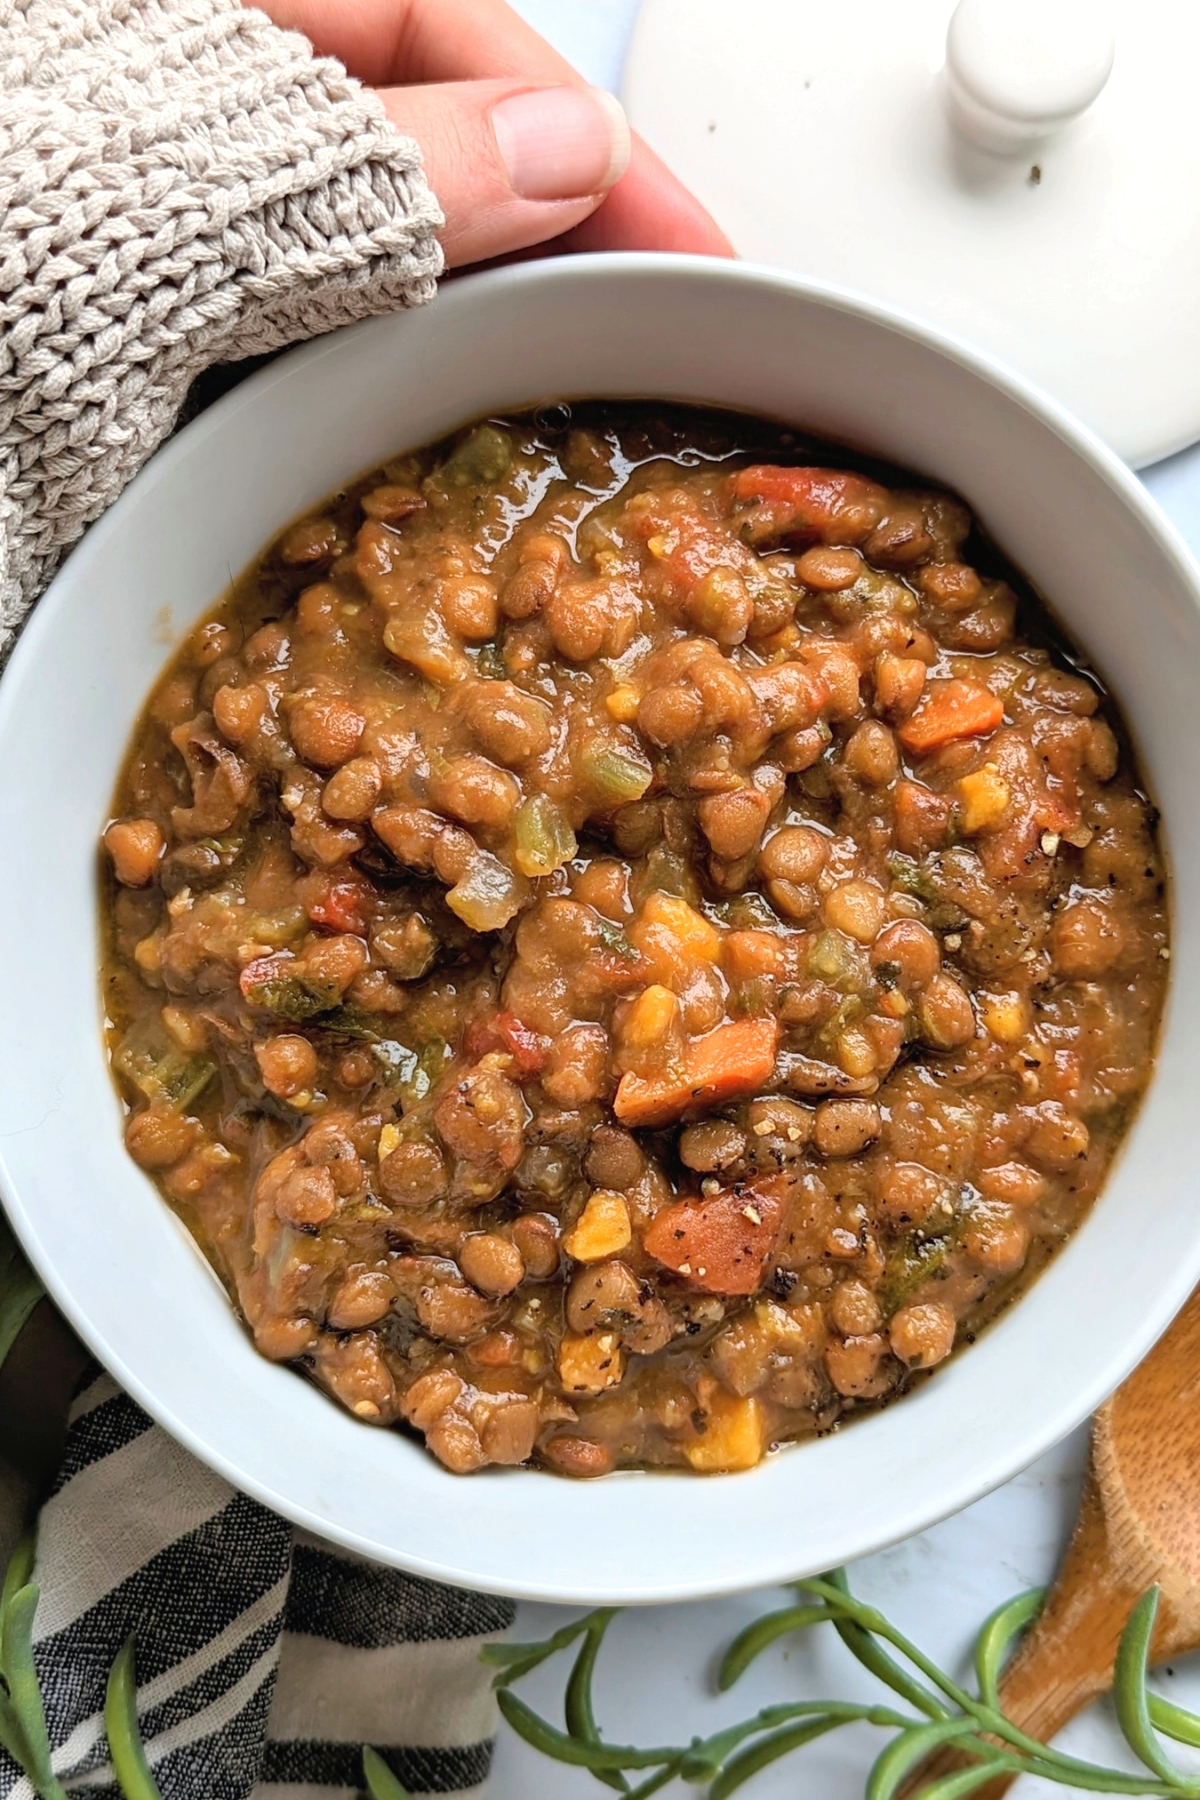 cozy lentil soup recipe sweater weather recipes with a hand holding a big bowl of lentil stew cooked in the instant pot pressure cooker